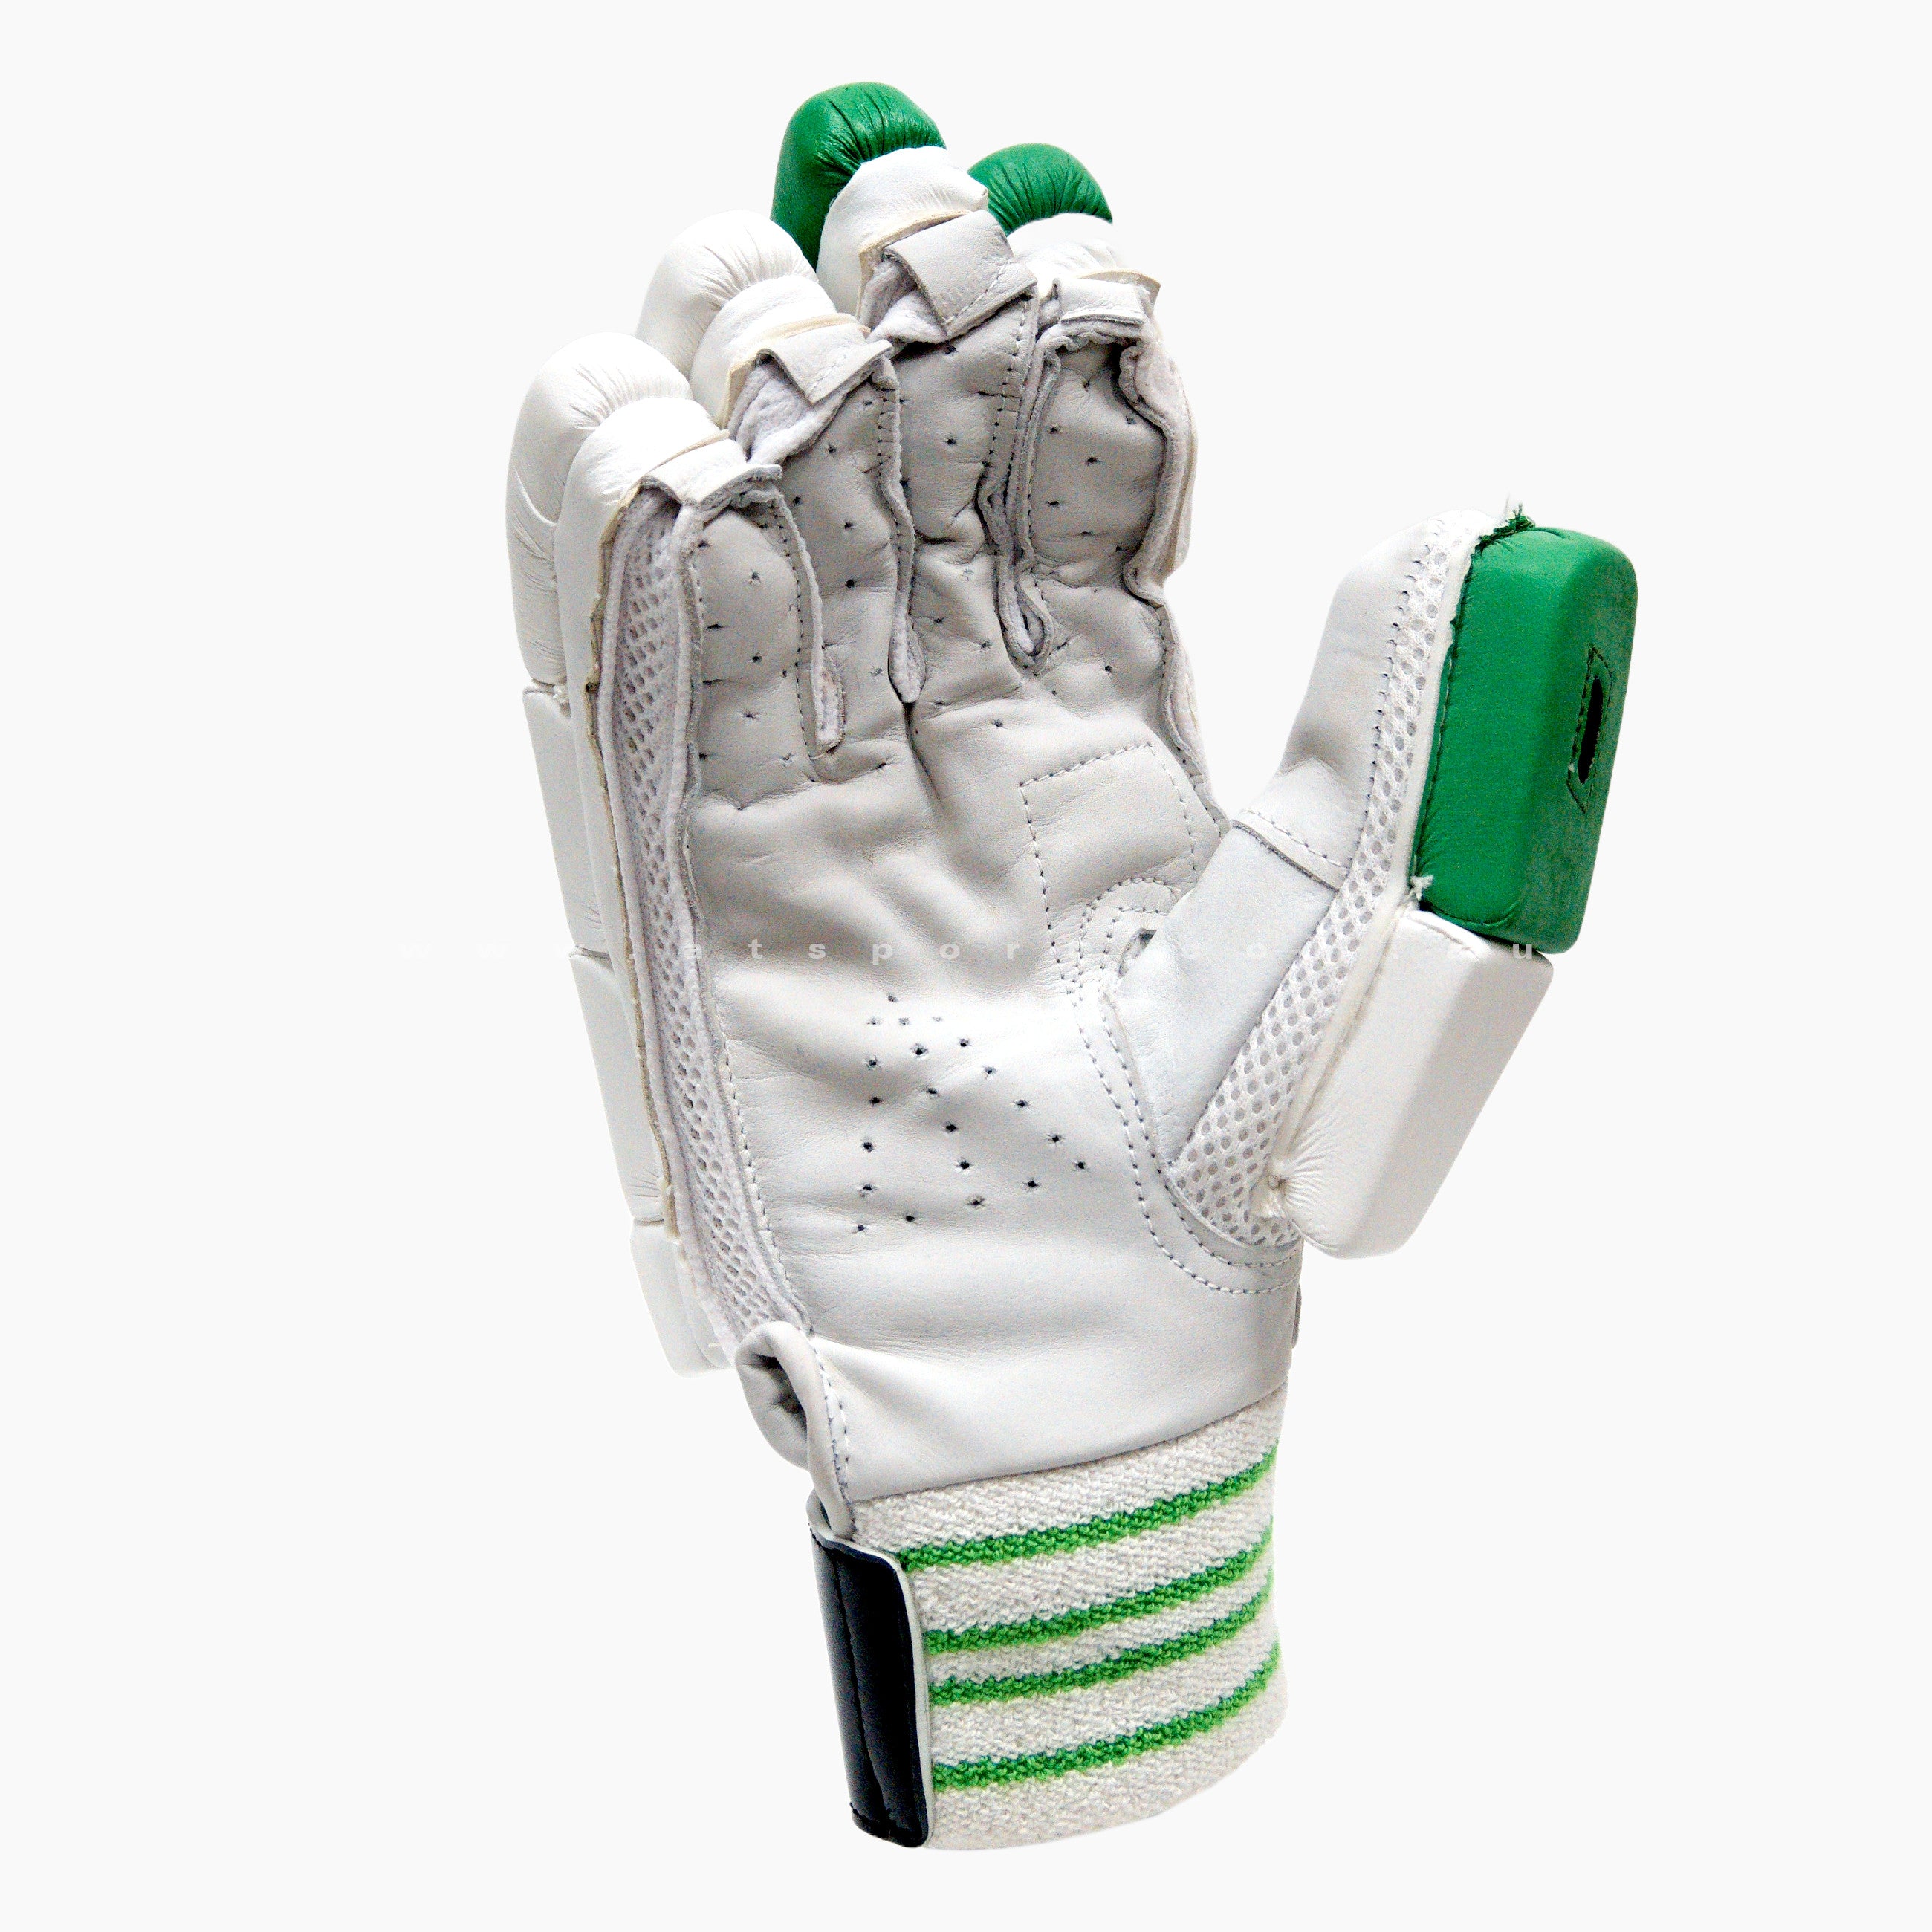 Duncan Fearnley Magnum Cricket Batting Gloves - YOUTH